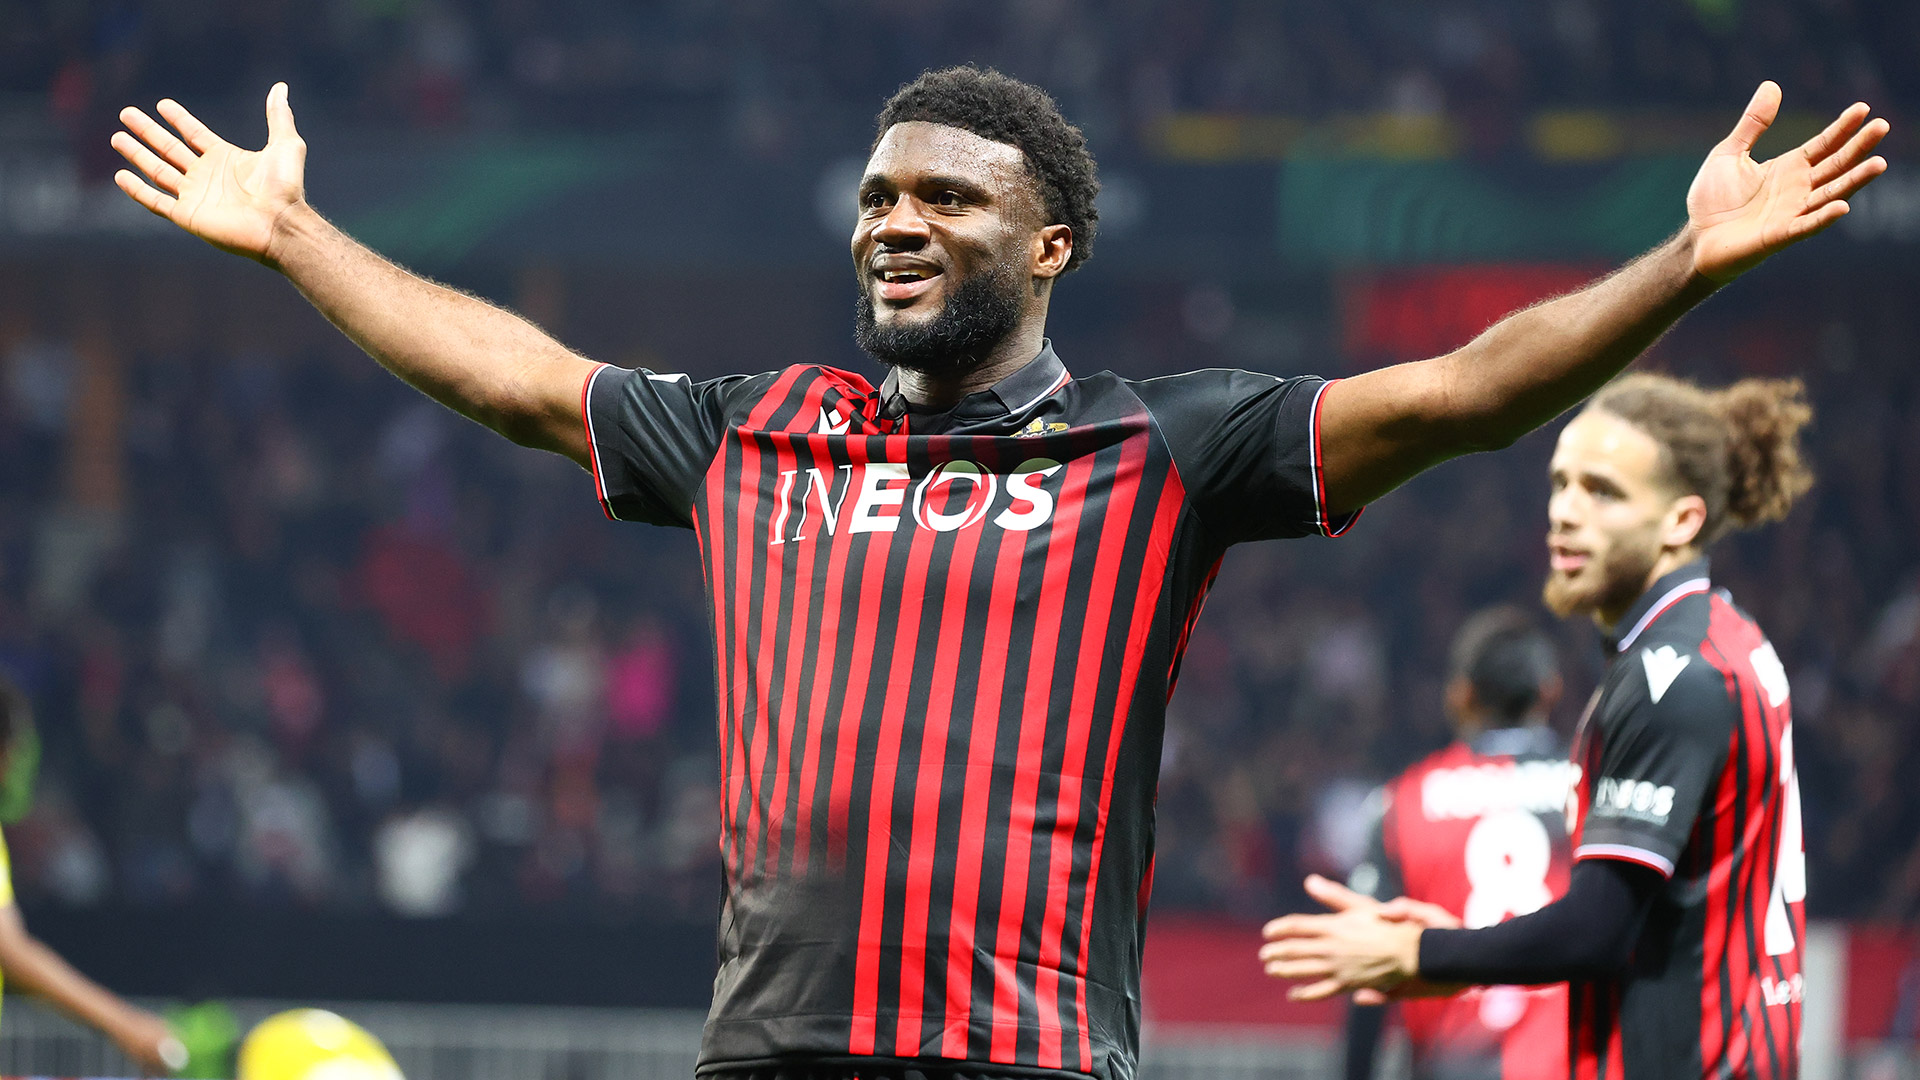 Transfer Napoli rekindle interest in OGC Nice striker as Osimhens replacement